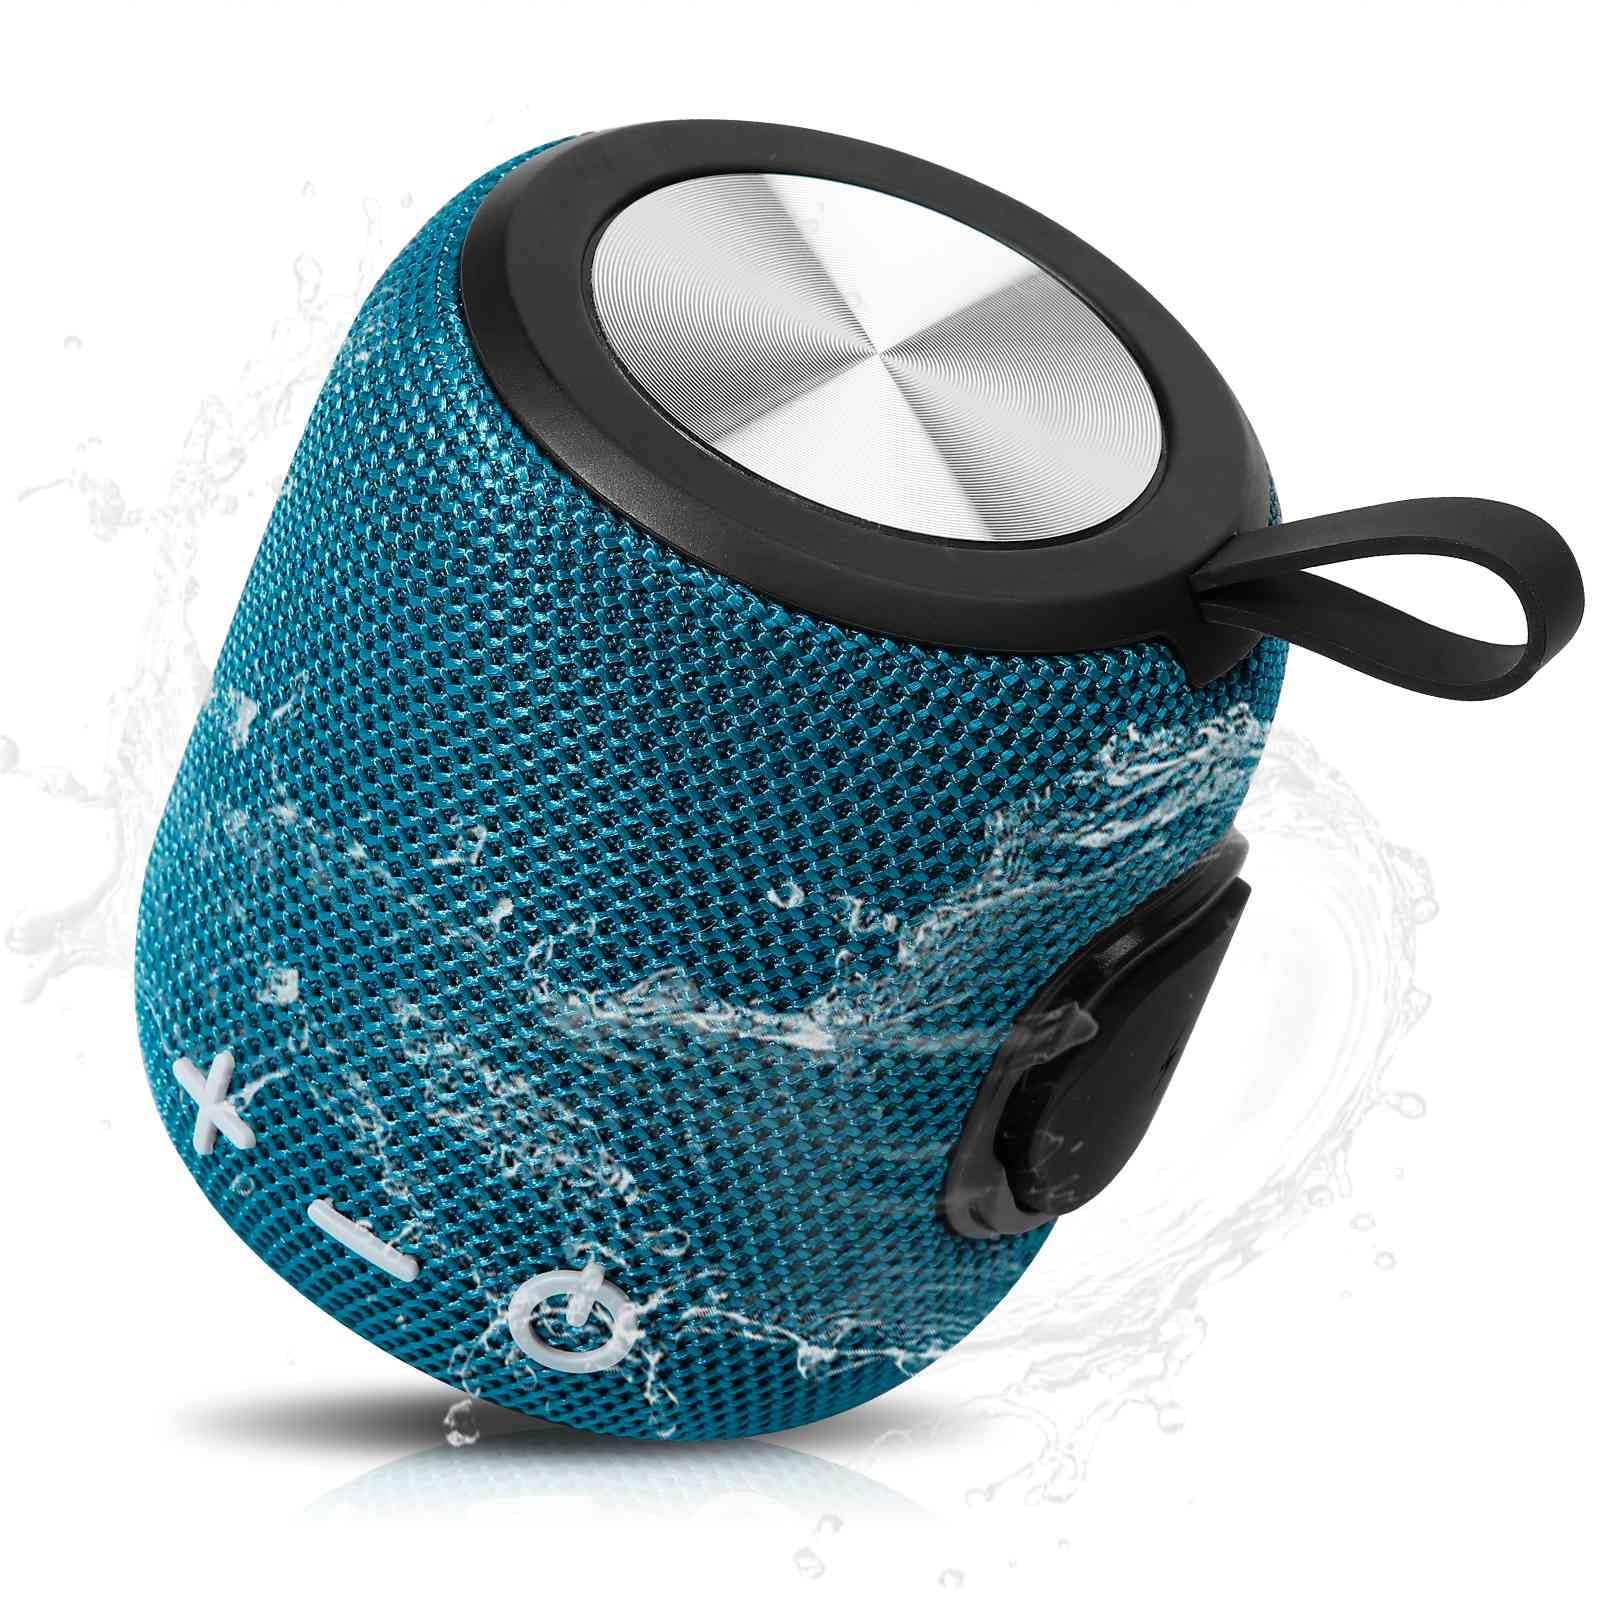 UrbanX Bluetooth Speaker: Powerful Stereo Sound, IPX7 Waterproof, True Wireless Stereo Pairing, Portable Design, Latest Bluetooth V5.2 - Perfect for Beach, Outdoor, Home, Parties- Blue